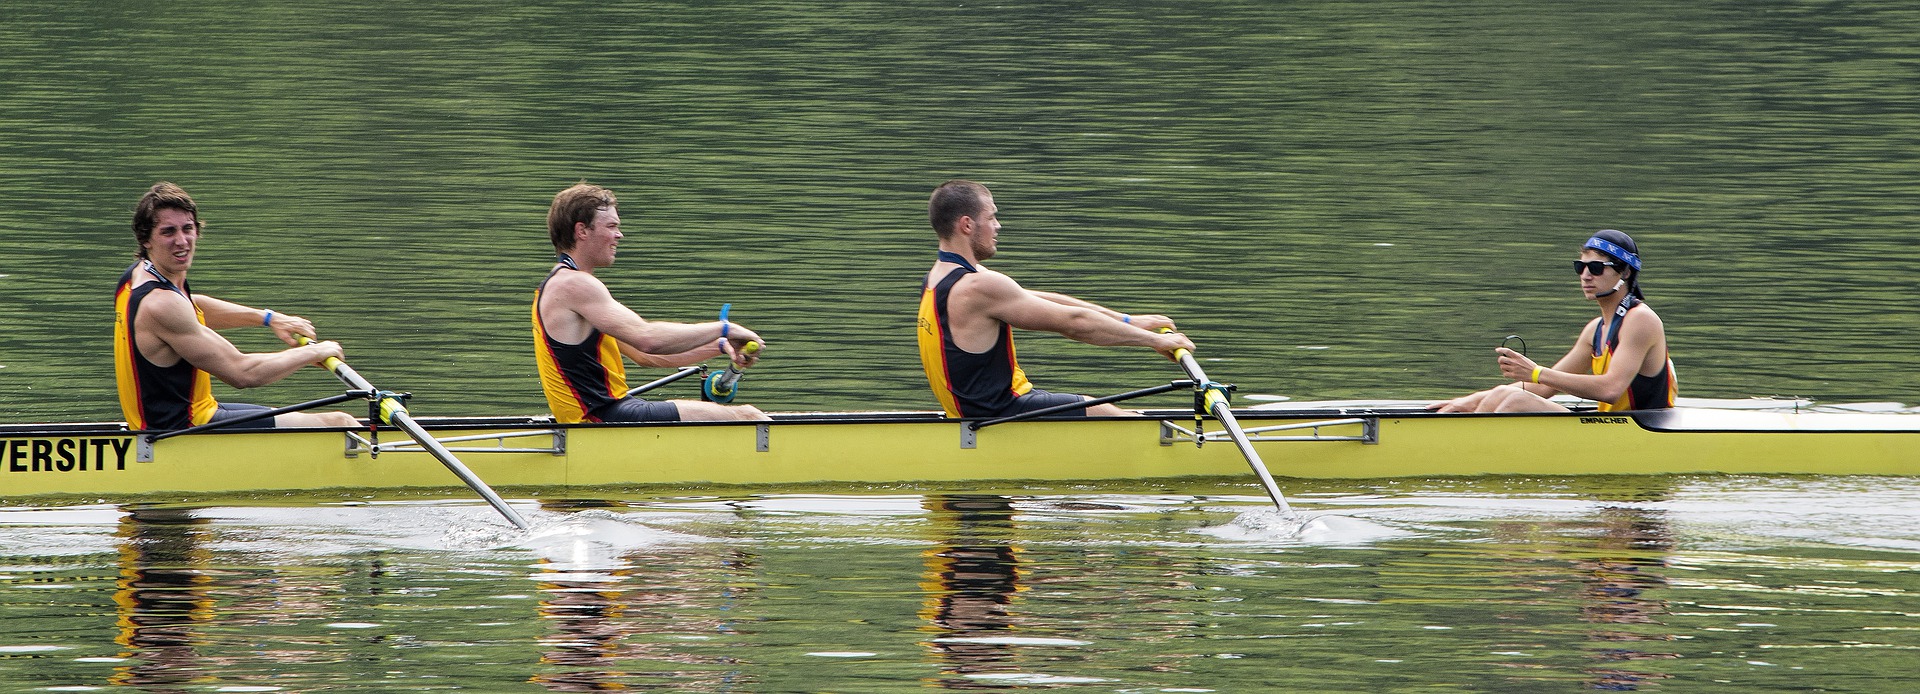 How to get in shape for rowing: The Ultimate Guide